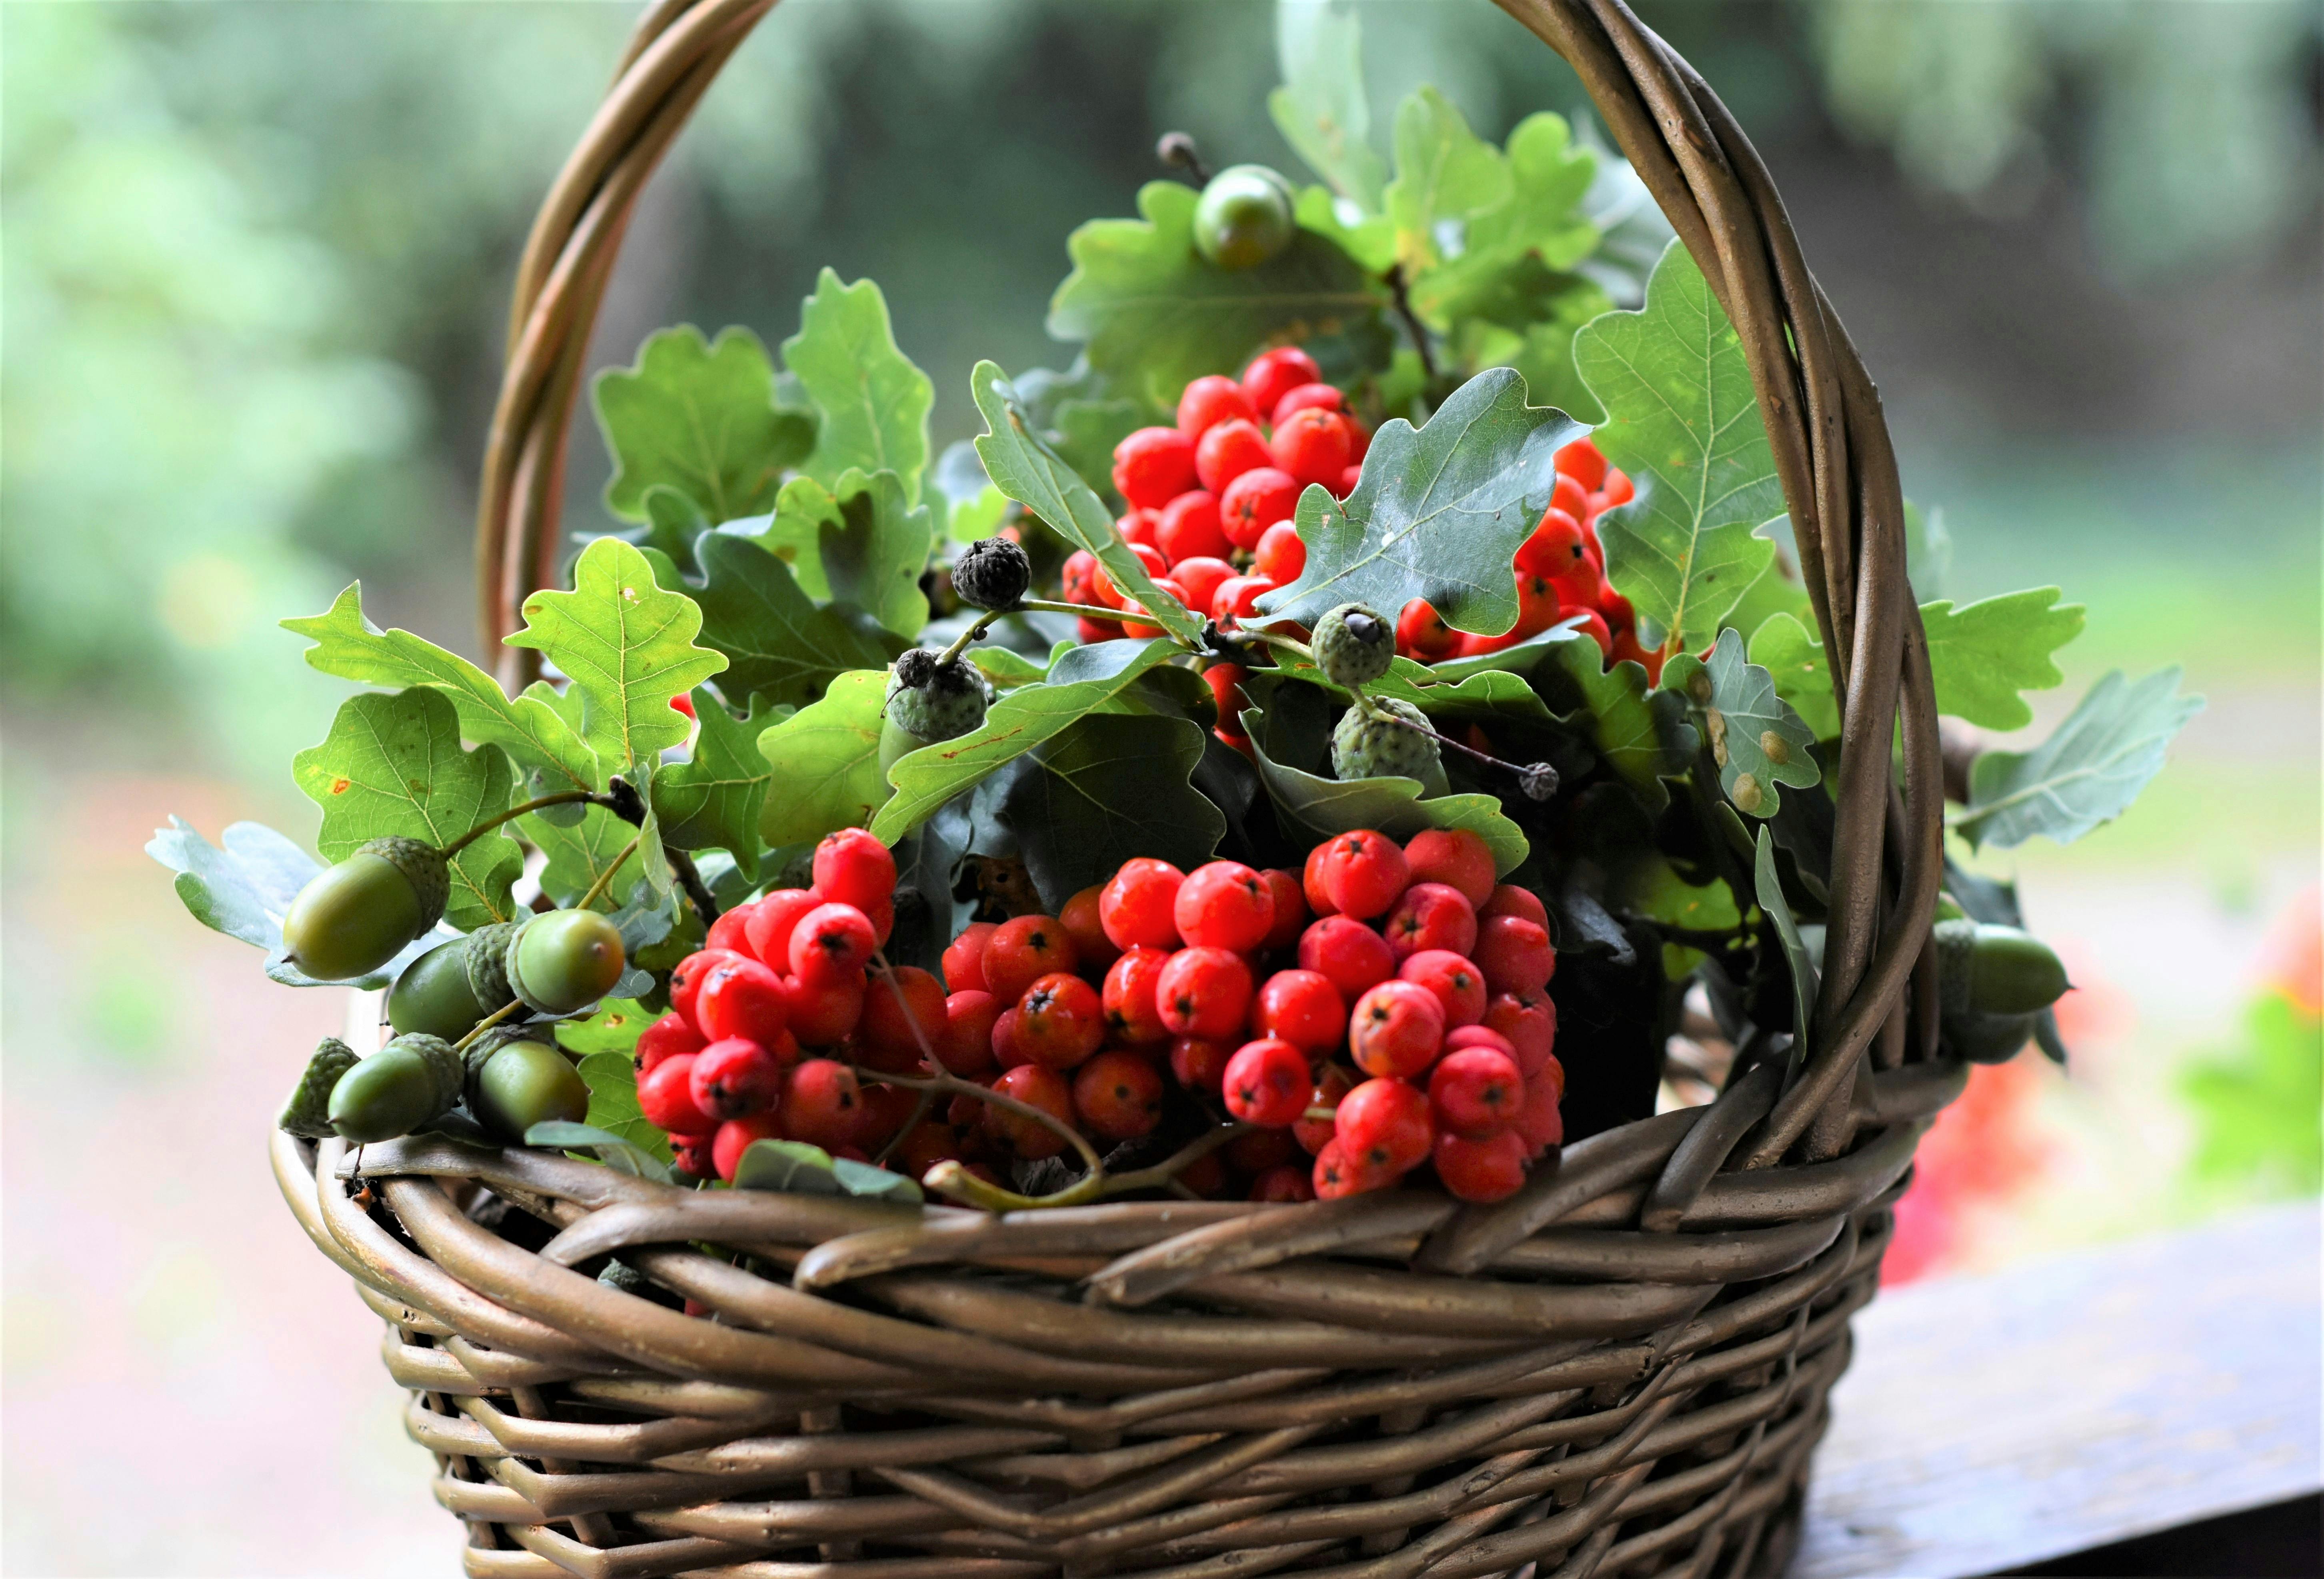 Basket with acorns, oak leaves and red berries